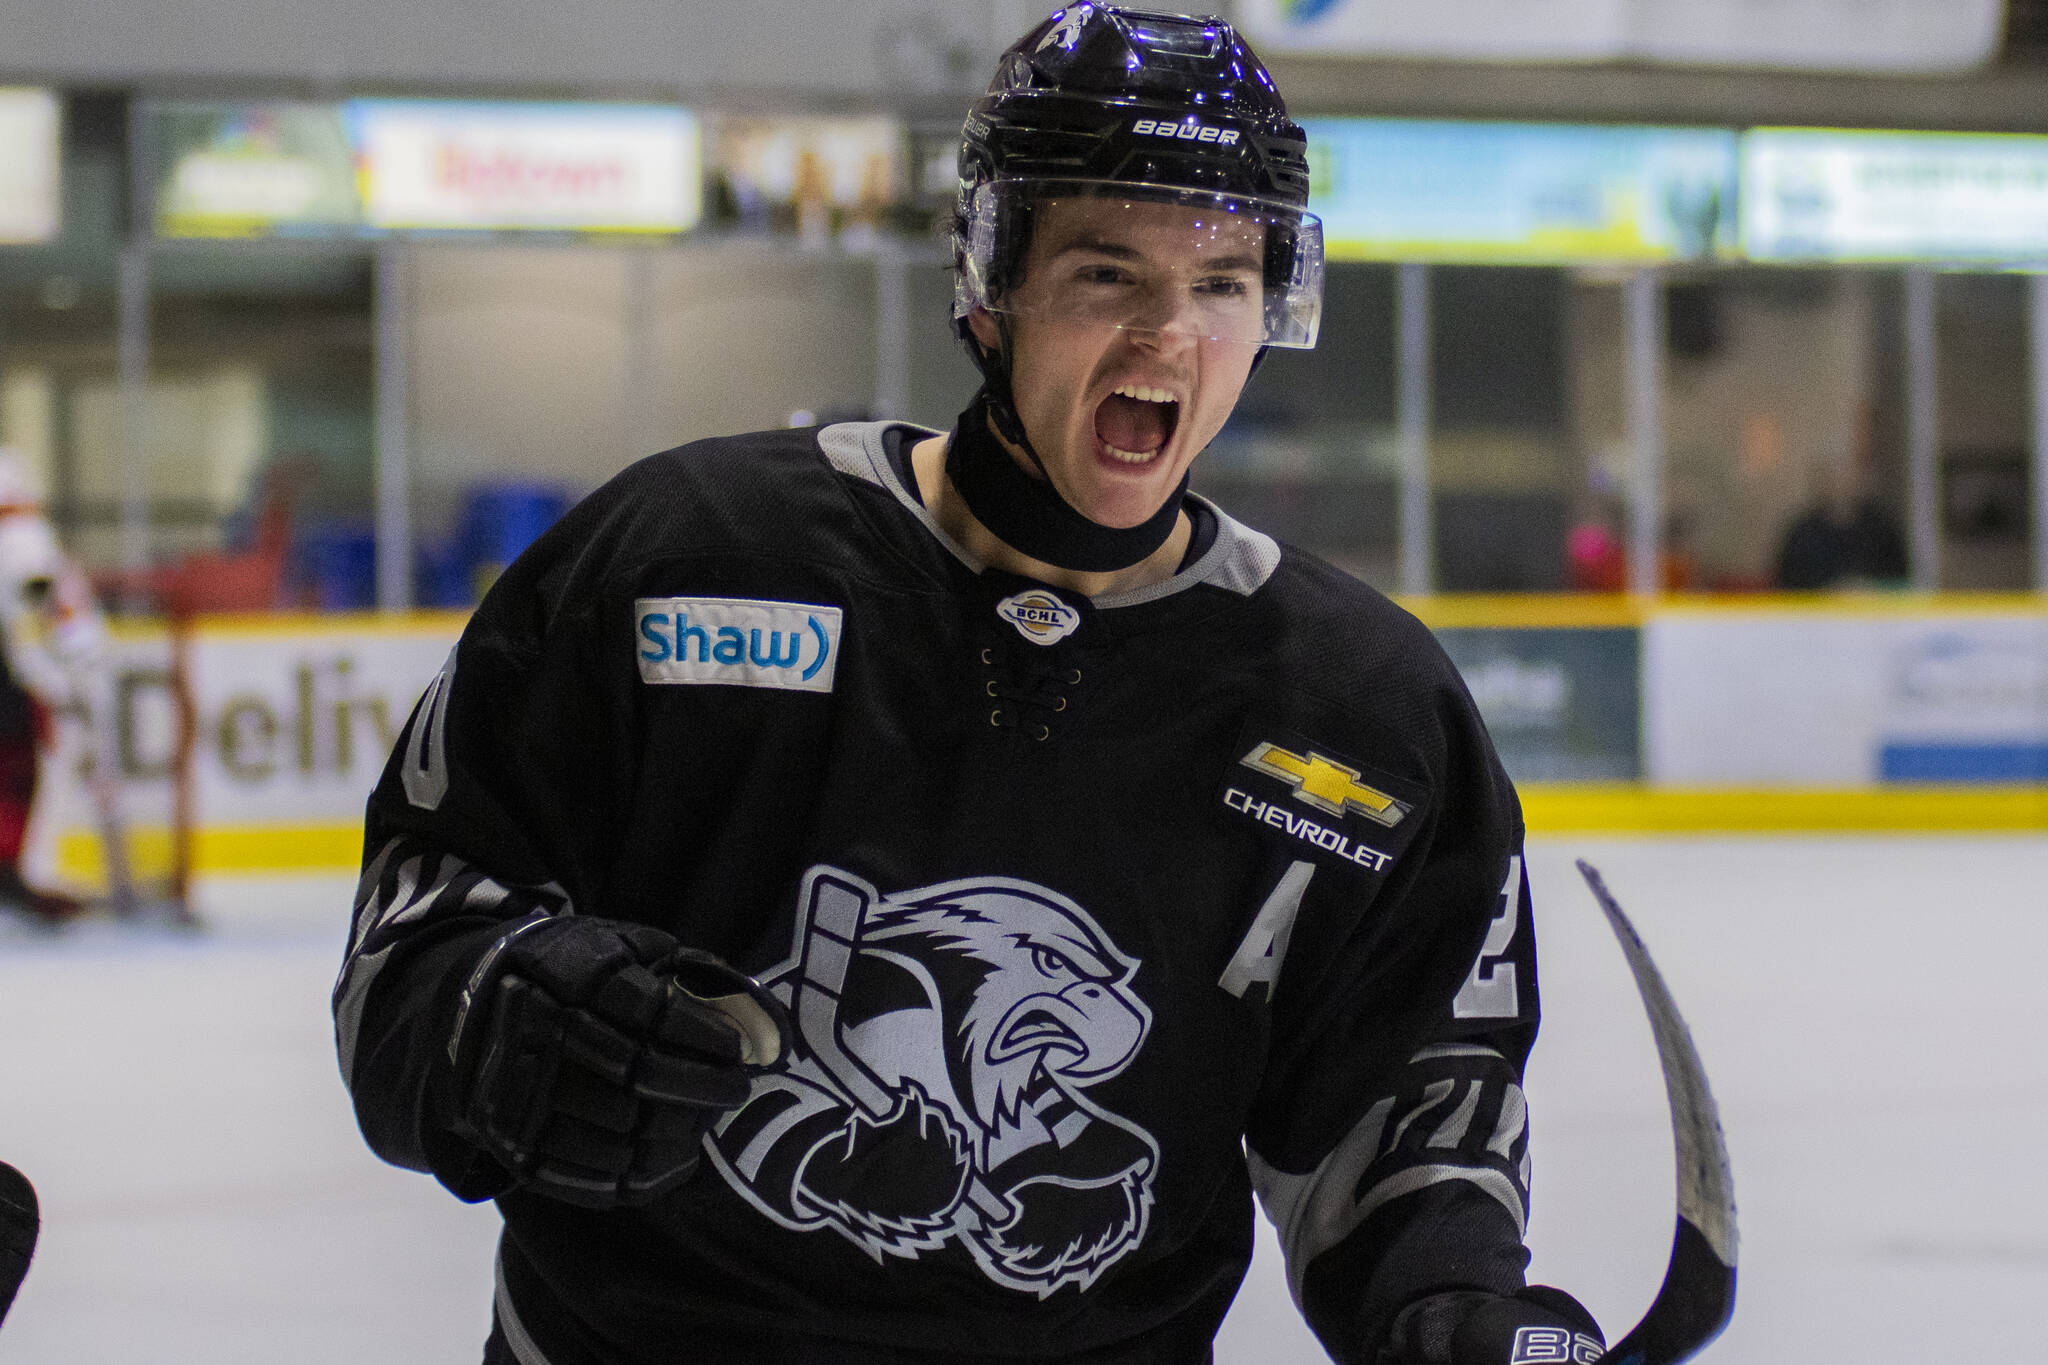 Surrey Eagles left winger Ante Zlomislic after scoring a goal at a recent game. Neck guards are now mandatory – based on availability of the protective neckwear – in the British Columbia Hockey League, in the wake of the death of a former NHLer in England. (Tav Morrison Media photo)